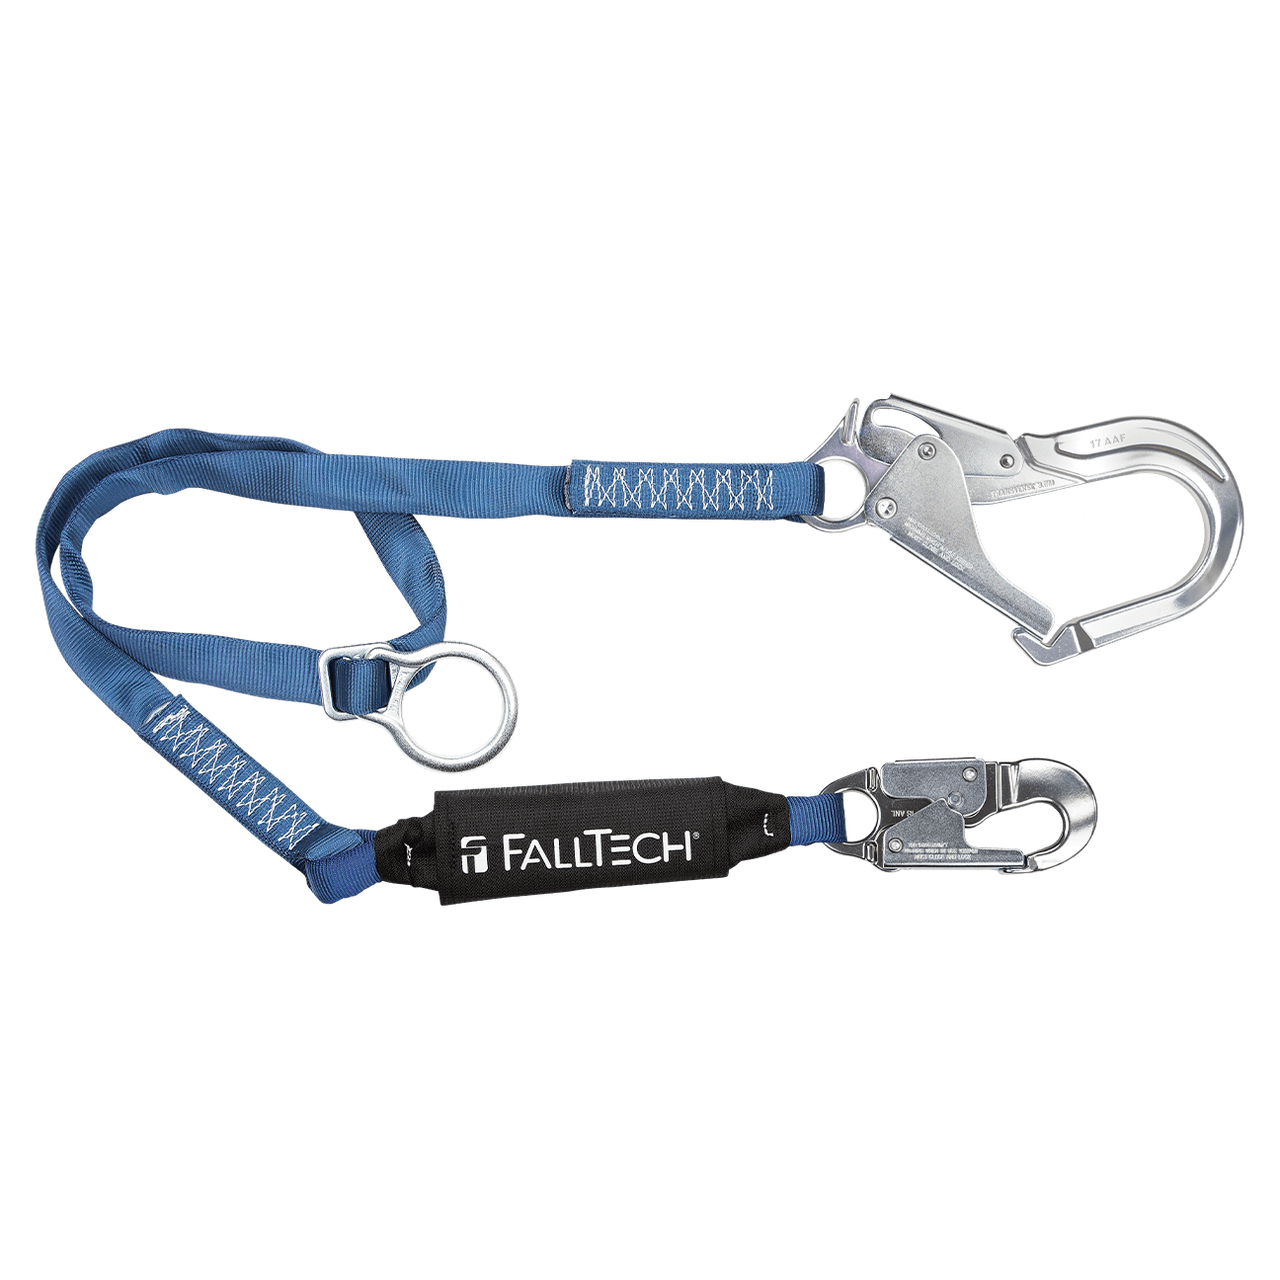 FallTech 6 Foot ViewPack Tie-Back Single Leg Shock Absorbing Lanyard from GME Supply